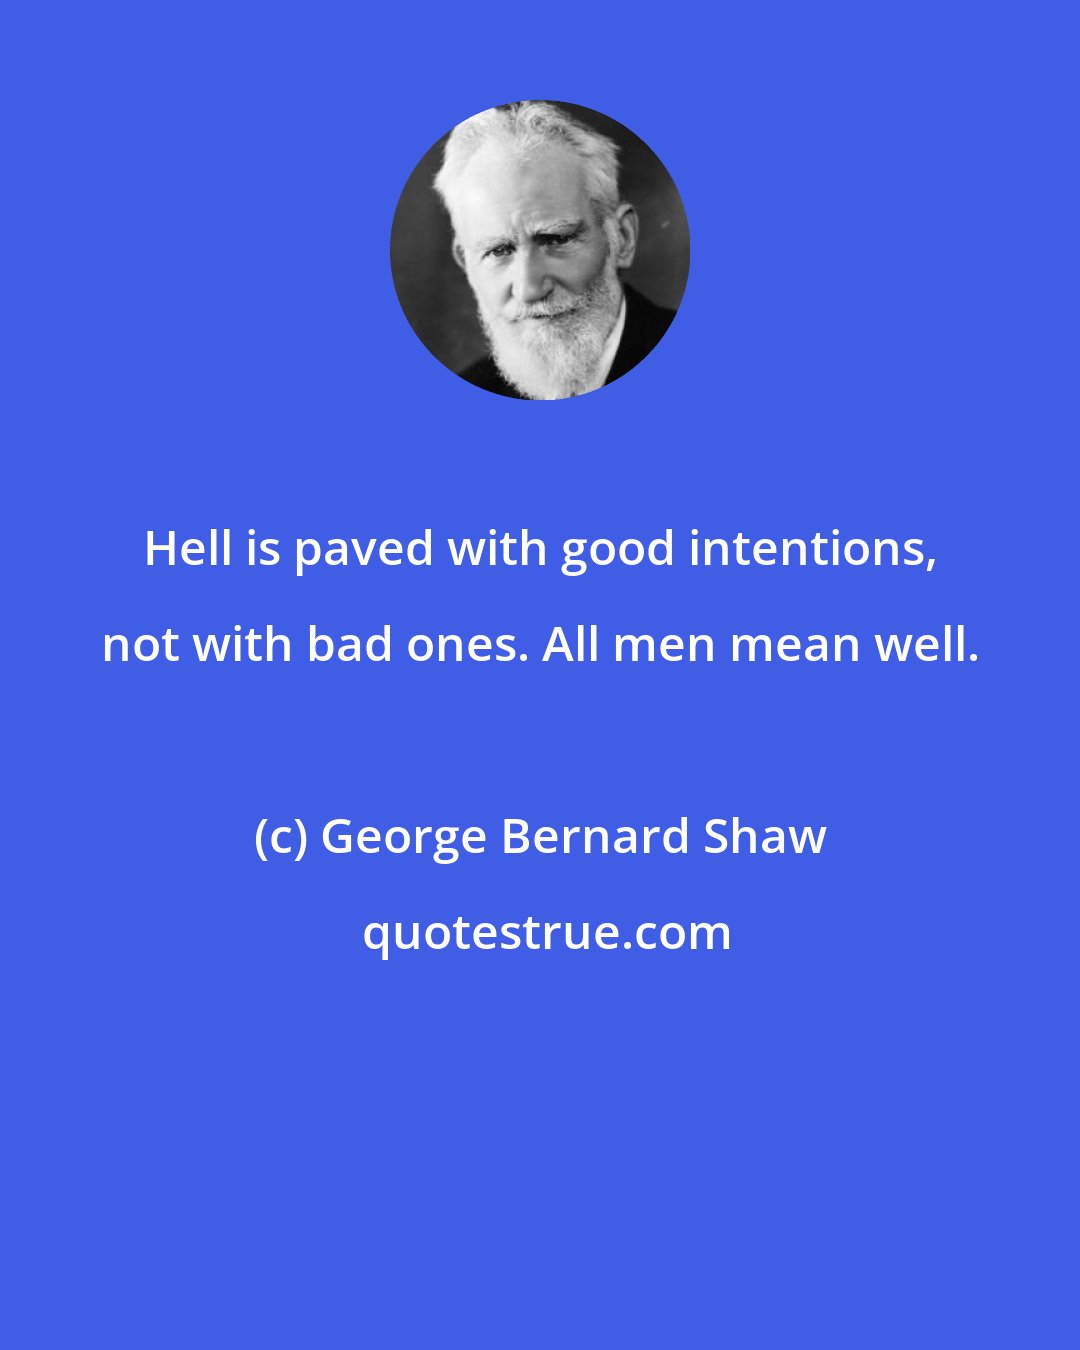 George Bernard Shaw: Hell is paved with good intentions, not with bad ones. All men mean well.